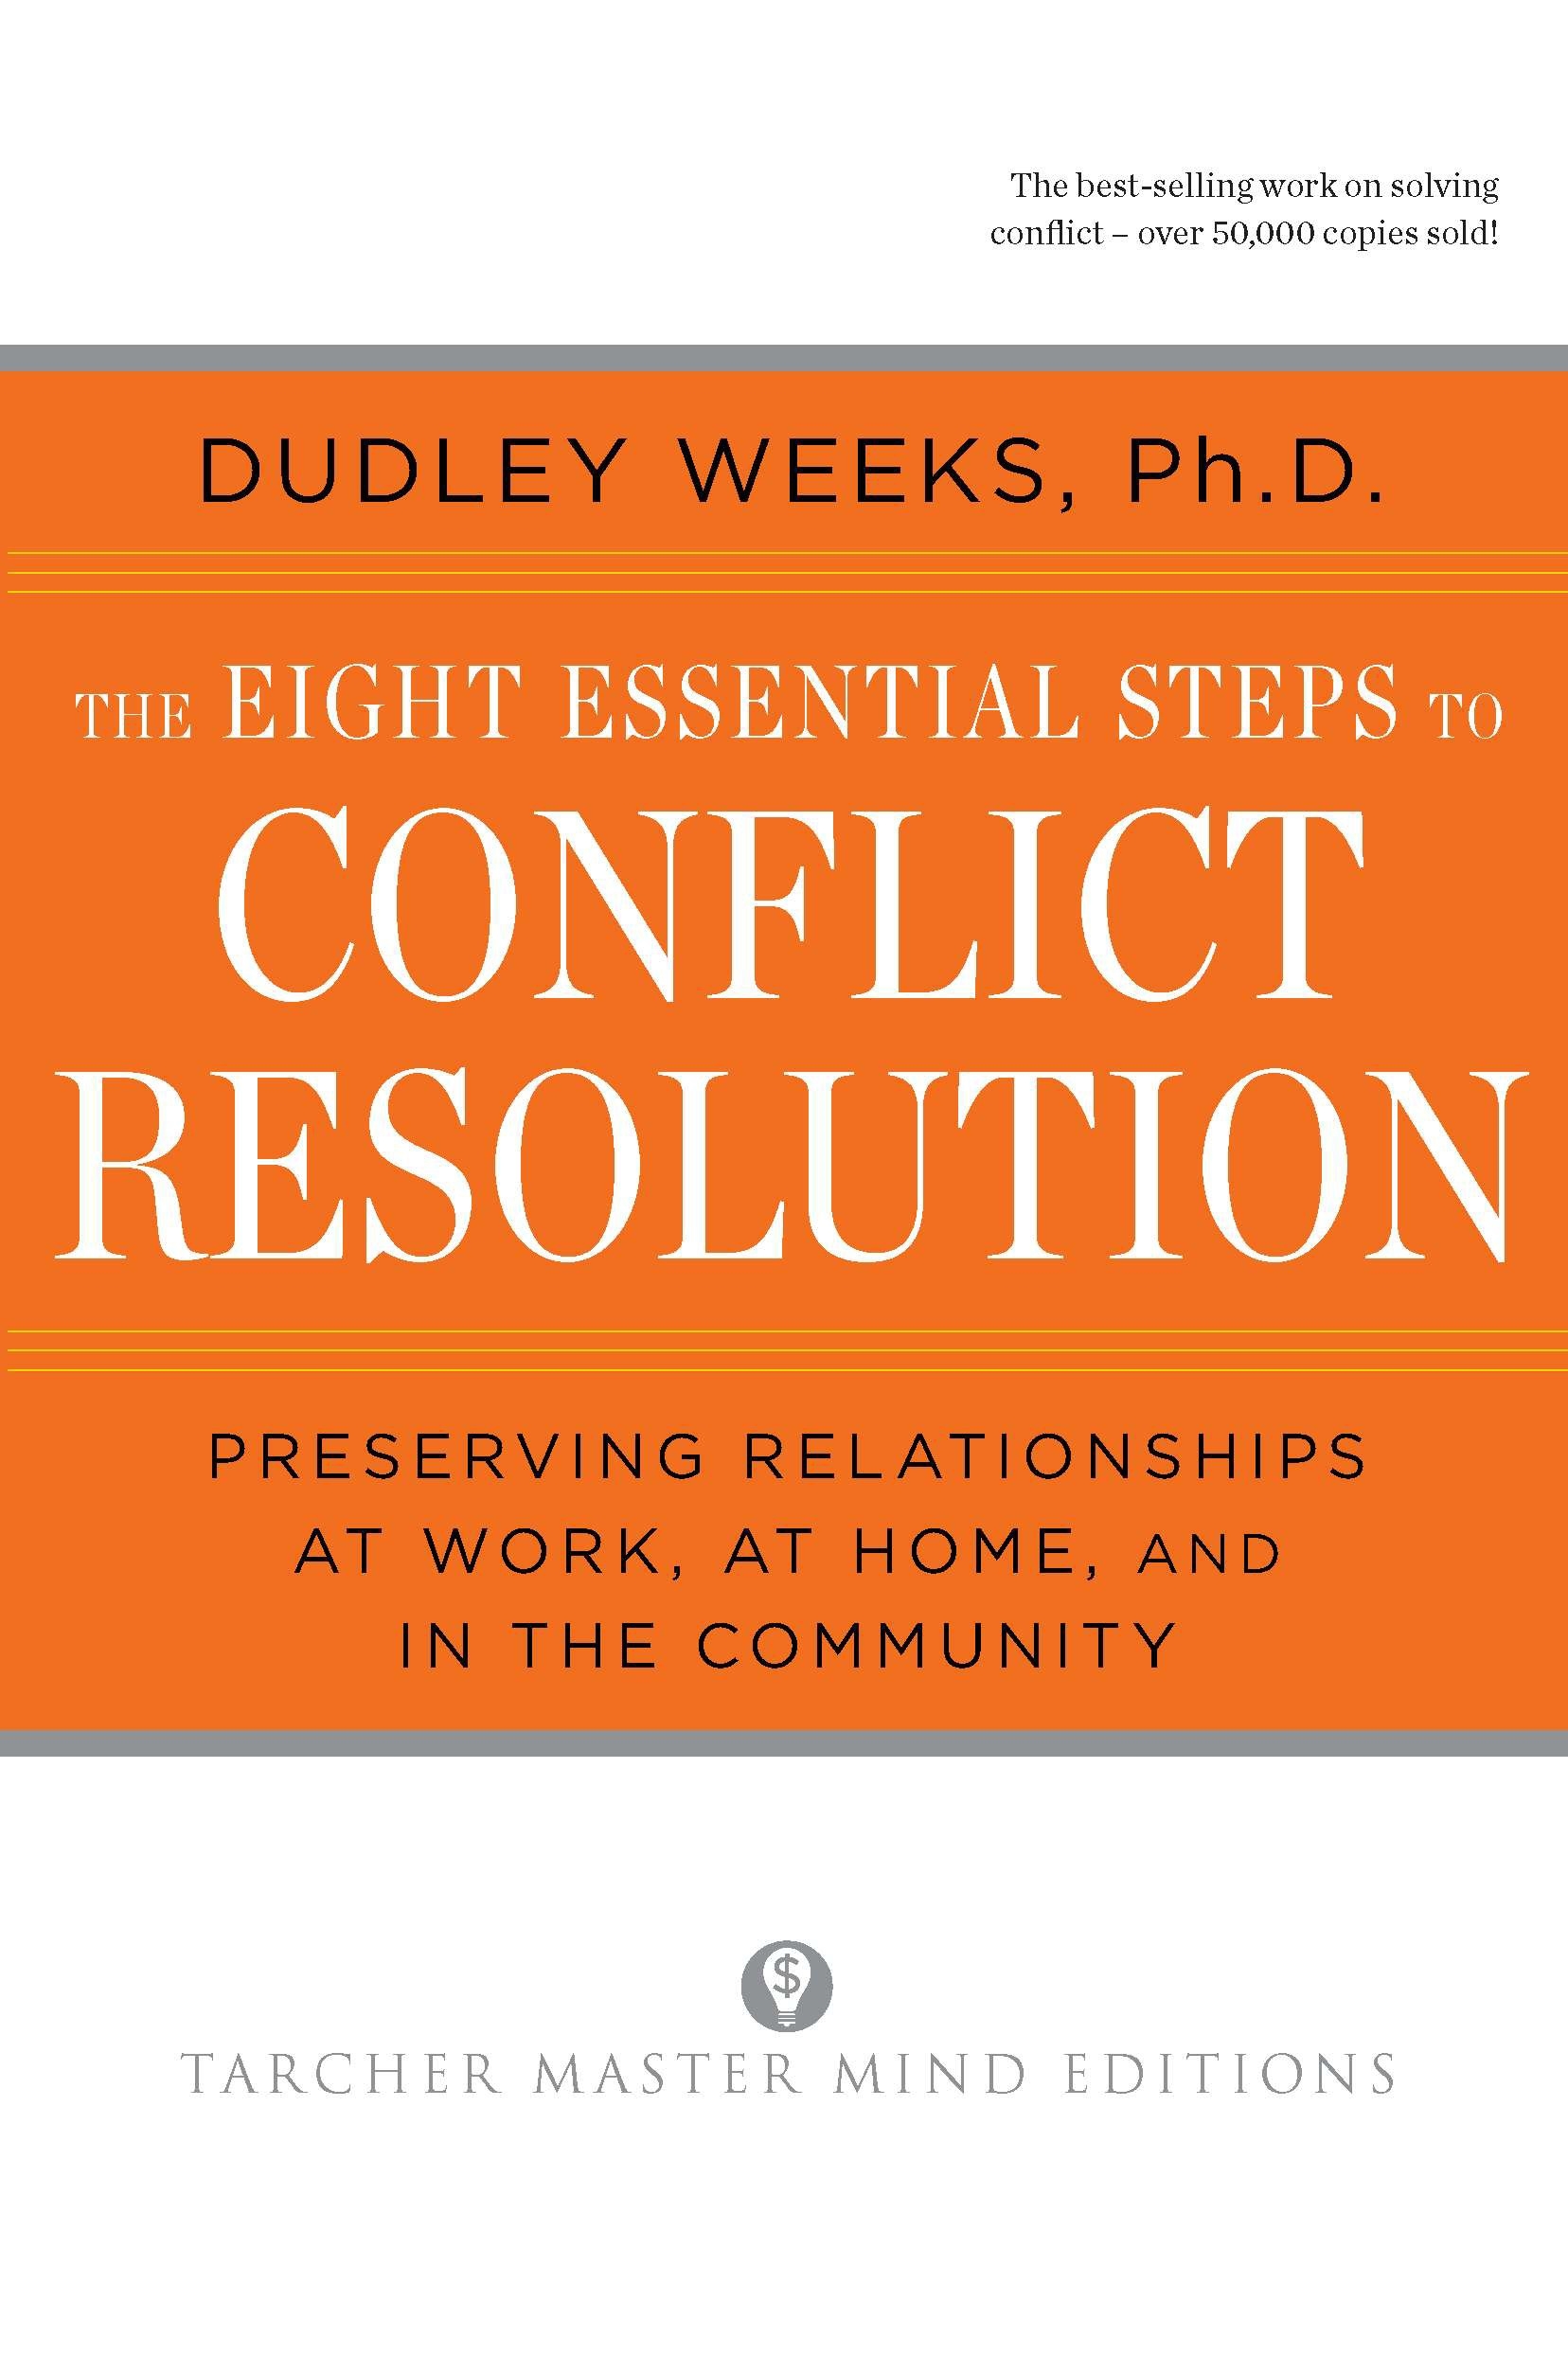 The Eight Essential Steps to Conflict Resolution by Dudley Weeks